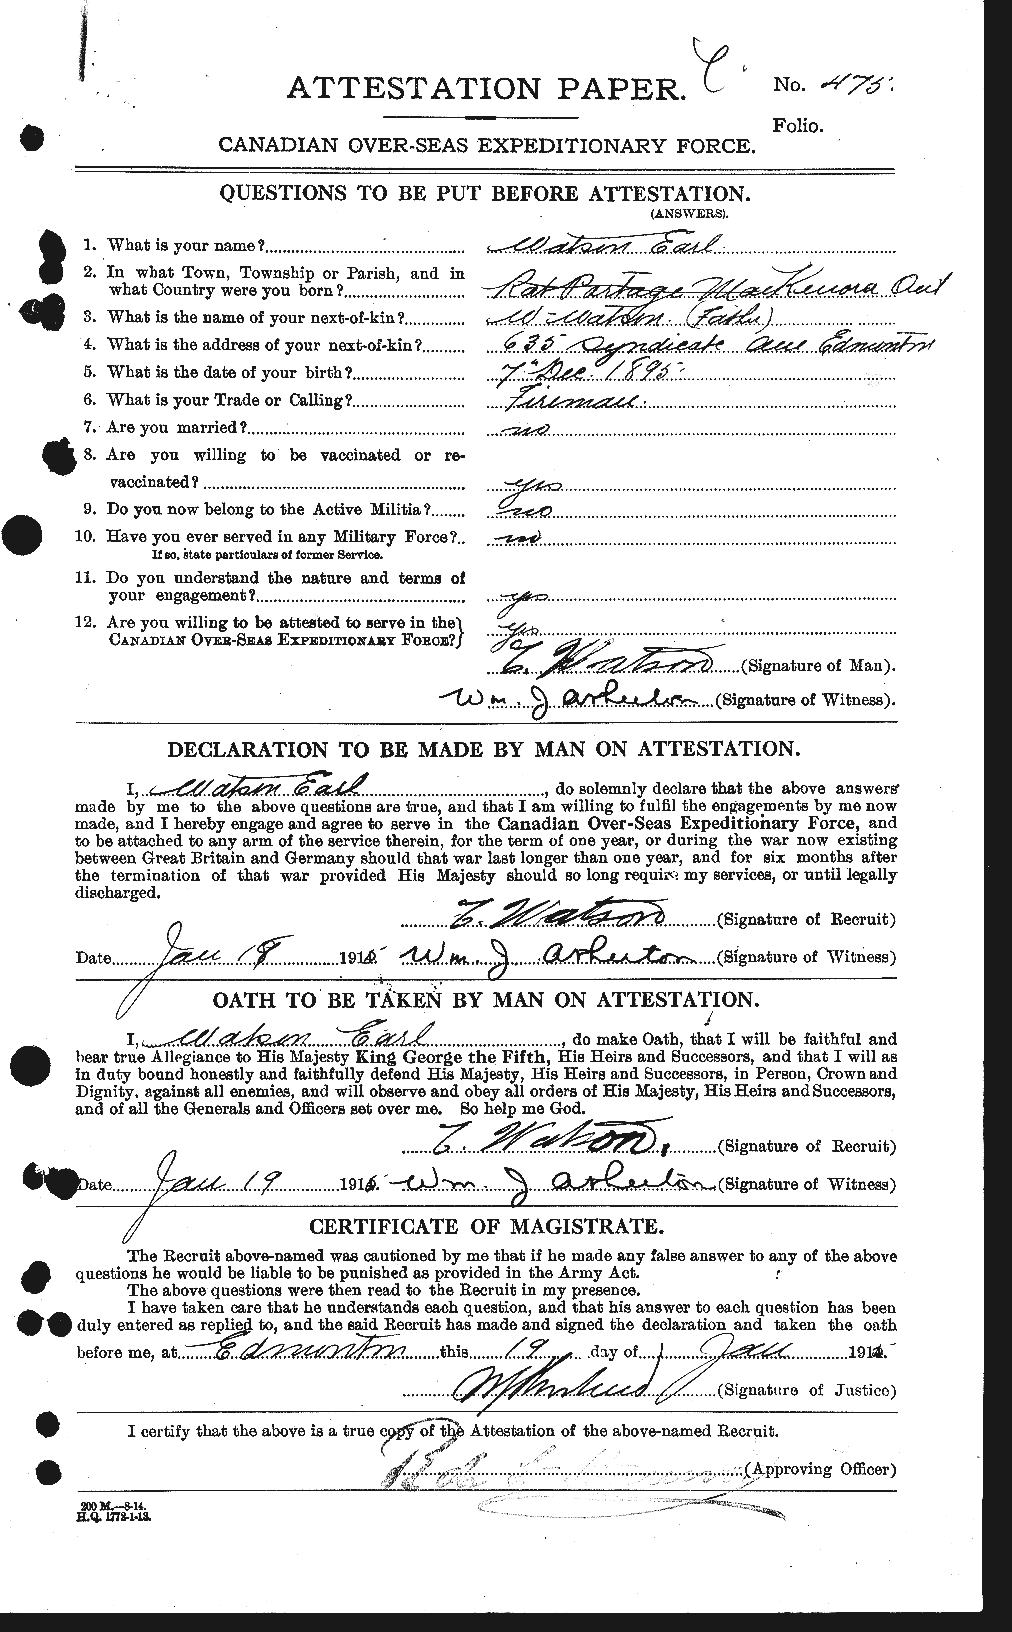 Personnel Records of the First World War - CEF 660386a